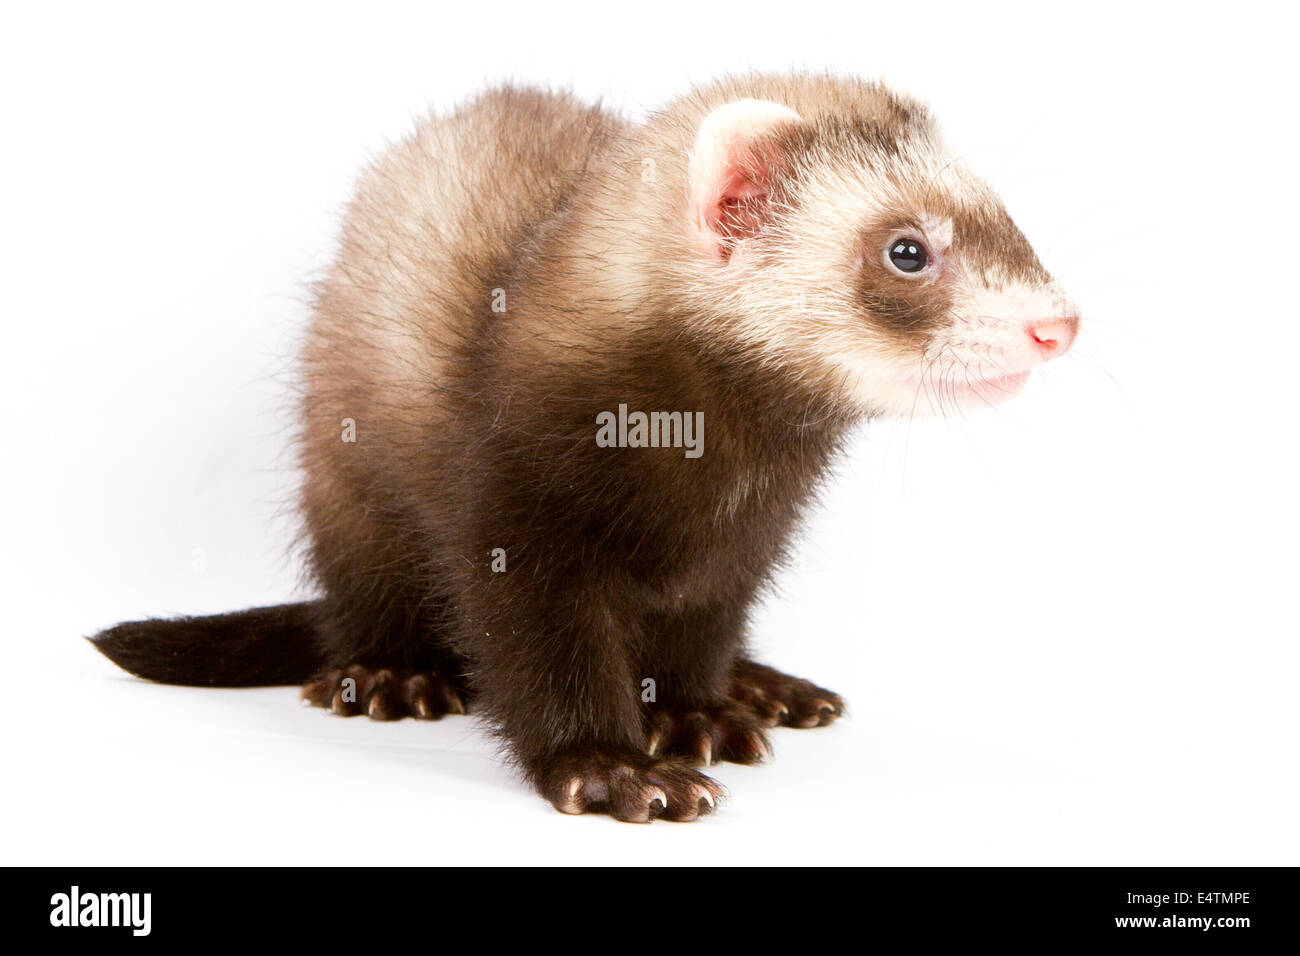 Ferret sitting and looking away in front of white background Stock Photo